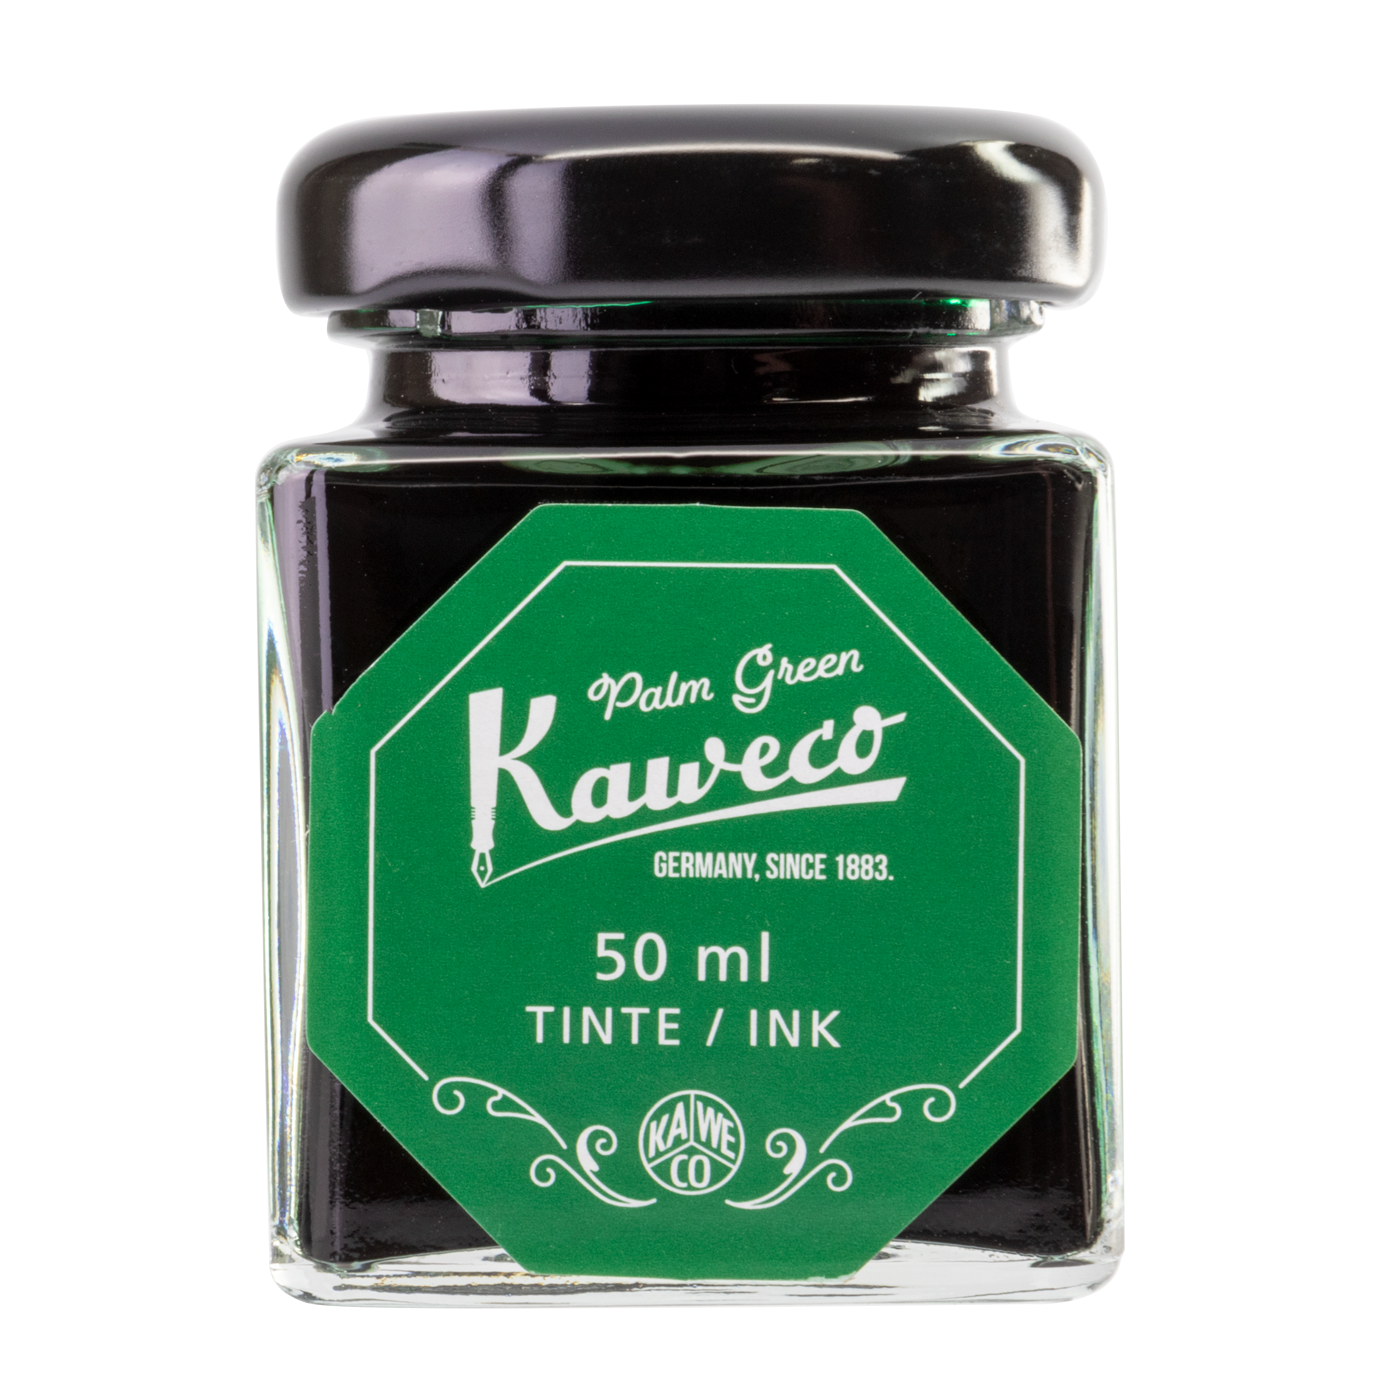 Kaweco Palm Green is a summery green fountain pen ink with medium shading and low red sheen. It dries in a quick 10 seconds in a medium nib on Rhodia and has a dry flow. Kaweco ink is made in Germany.